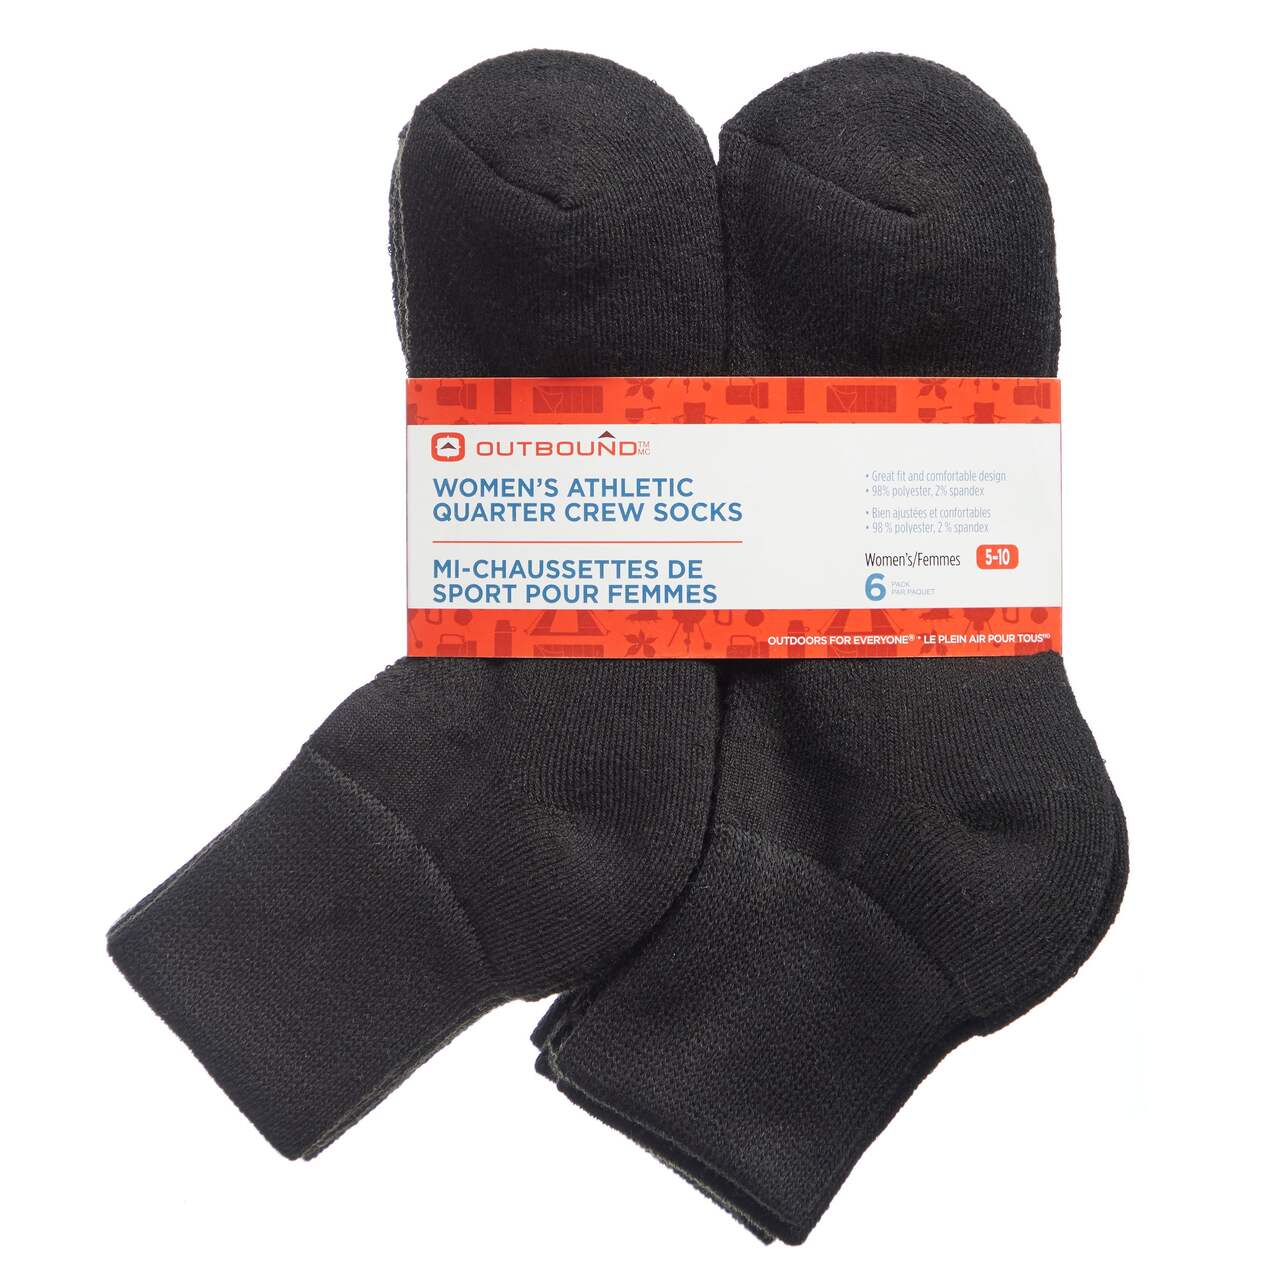 Outbound Women's Athletic Quarter-Crew Socks with Cushioned Sole